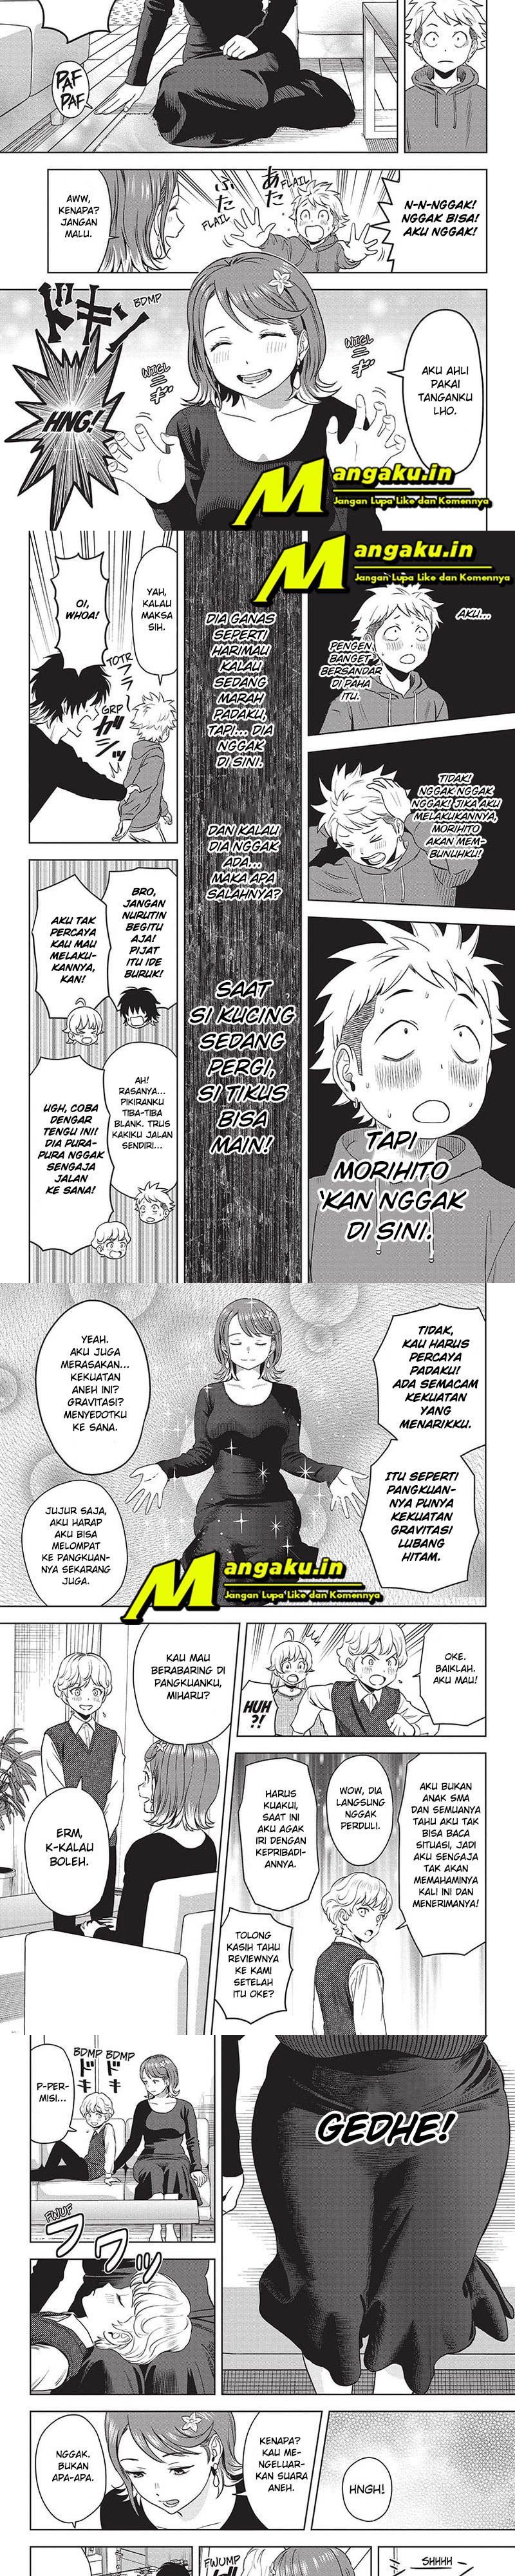 Witch Watch Chapter 73 3